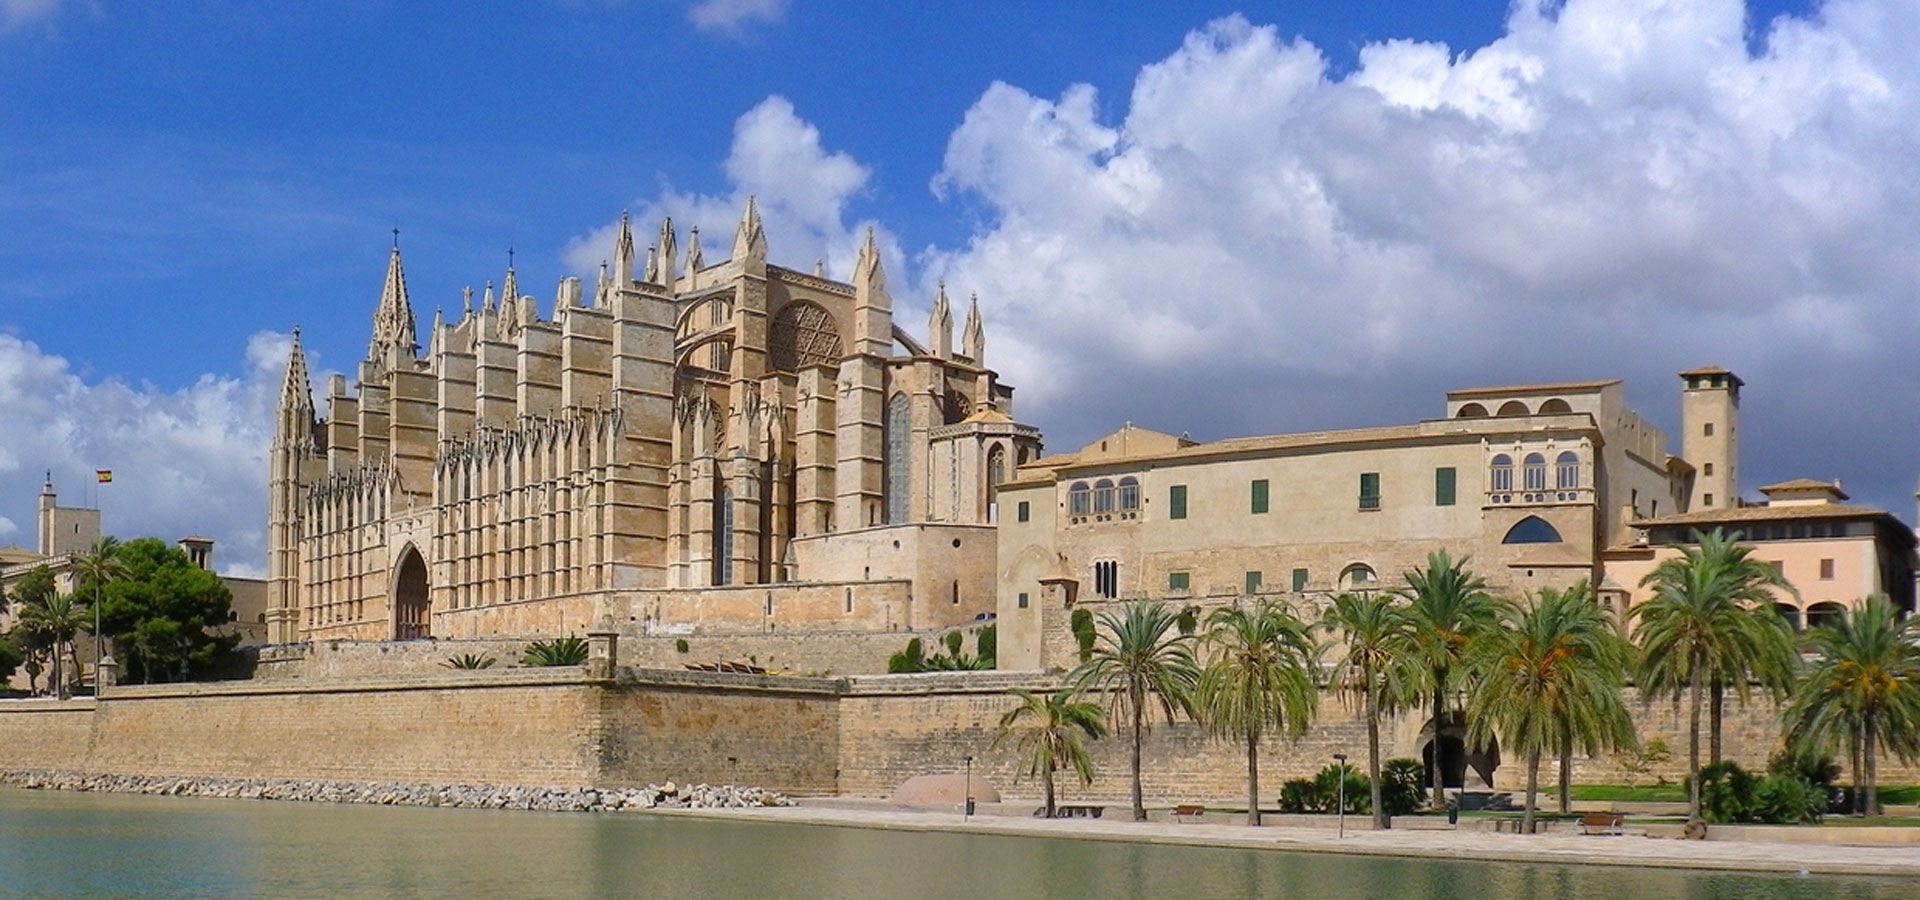 Palma Old Town property market is interlaced with historical budilings and churches.